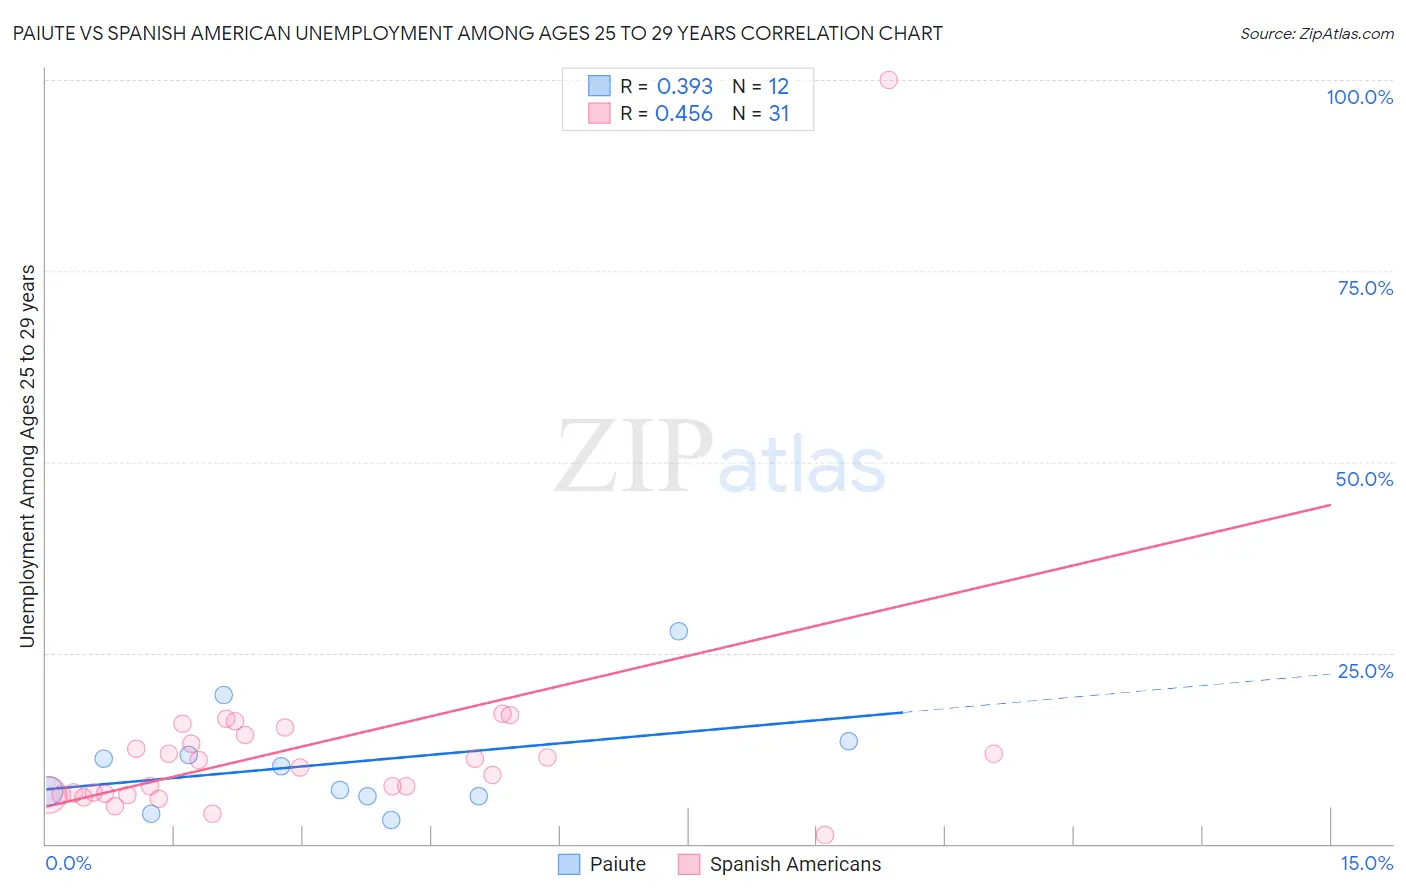 Paiute vs Spanish American Unemployment Among Ages 25 to 29 years